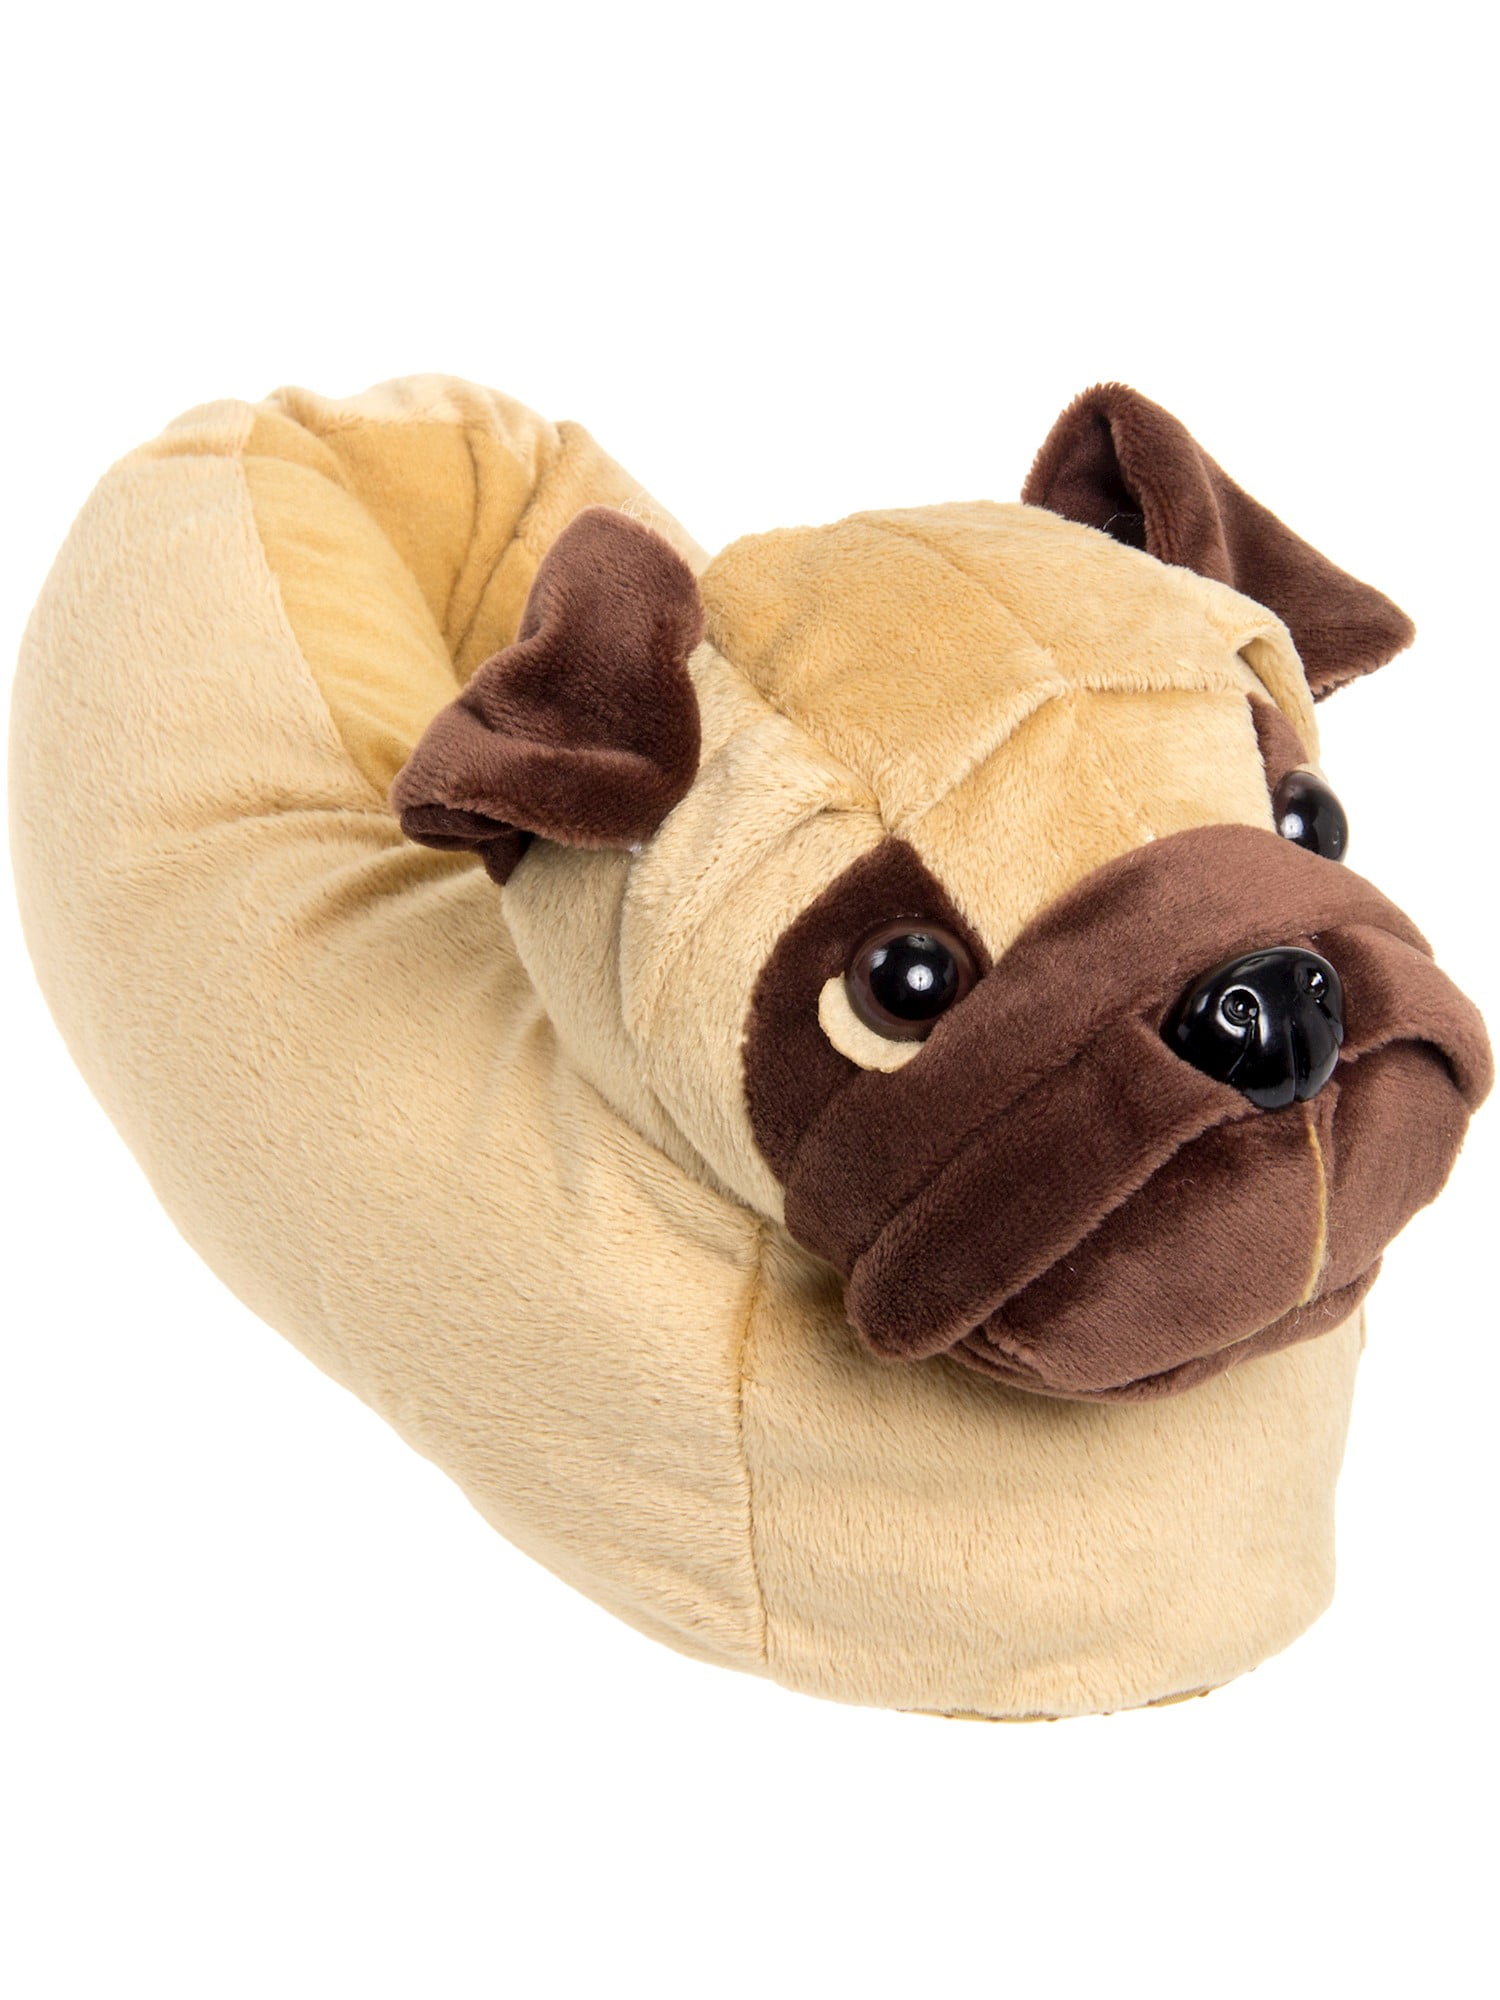 Plush Pug Dog Slippers by Silver Lilly 